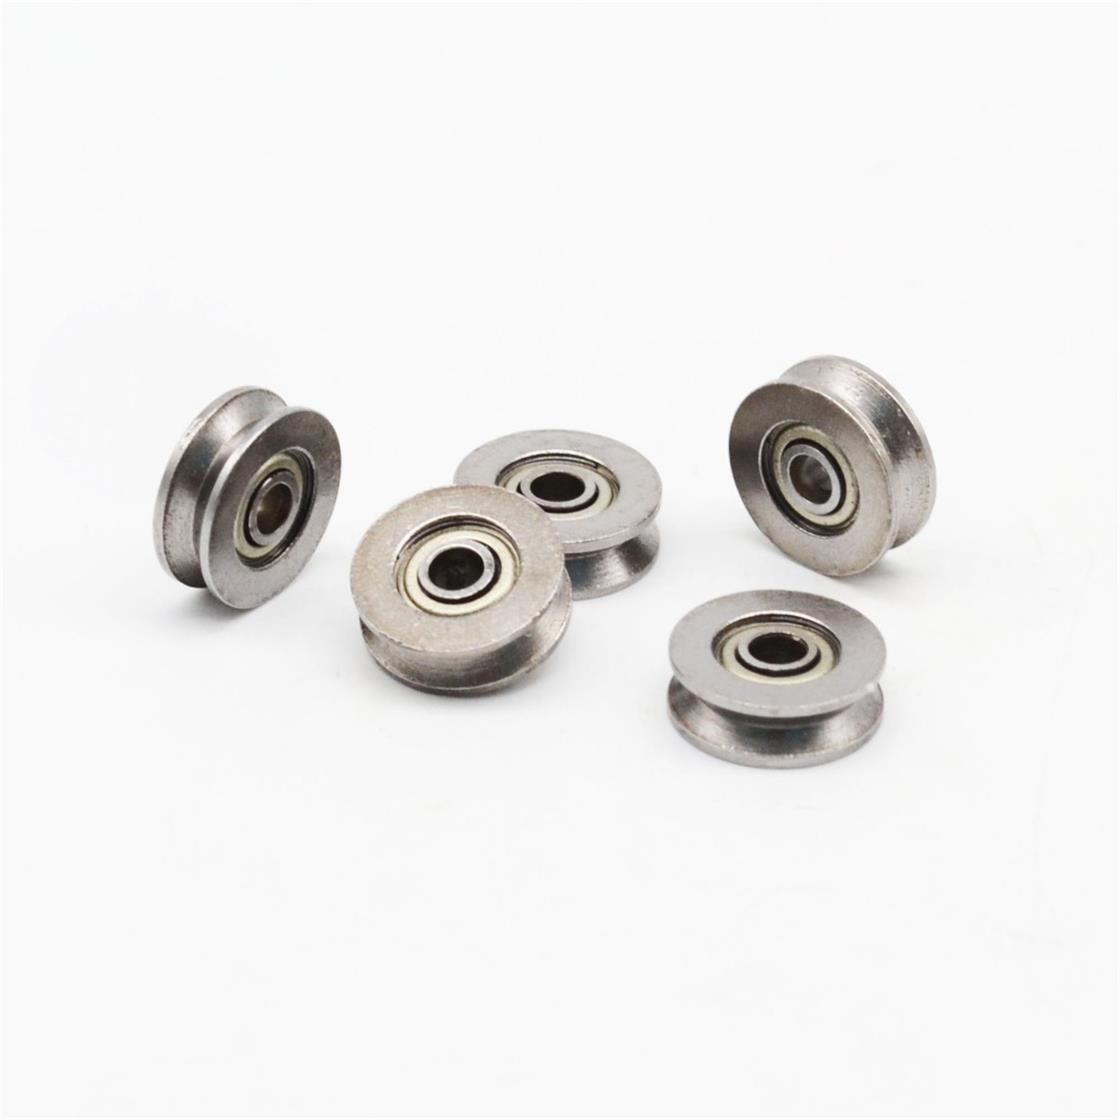 SG10 U Groove Guide Ball Bearing 4 x 13 x 6mm Stainless Bearing Steel U Track Pulley Rail Roller Wheel Bearings,for Embroidery Machine 